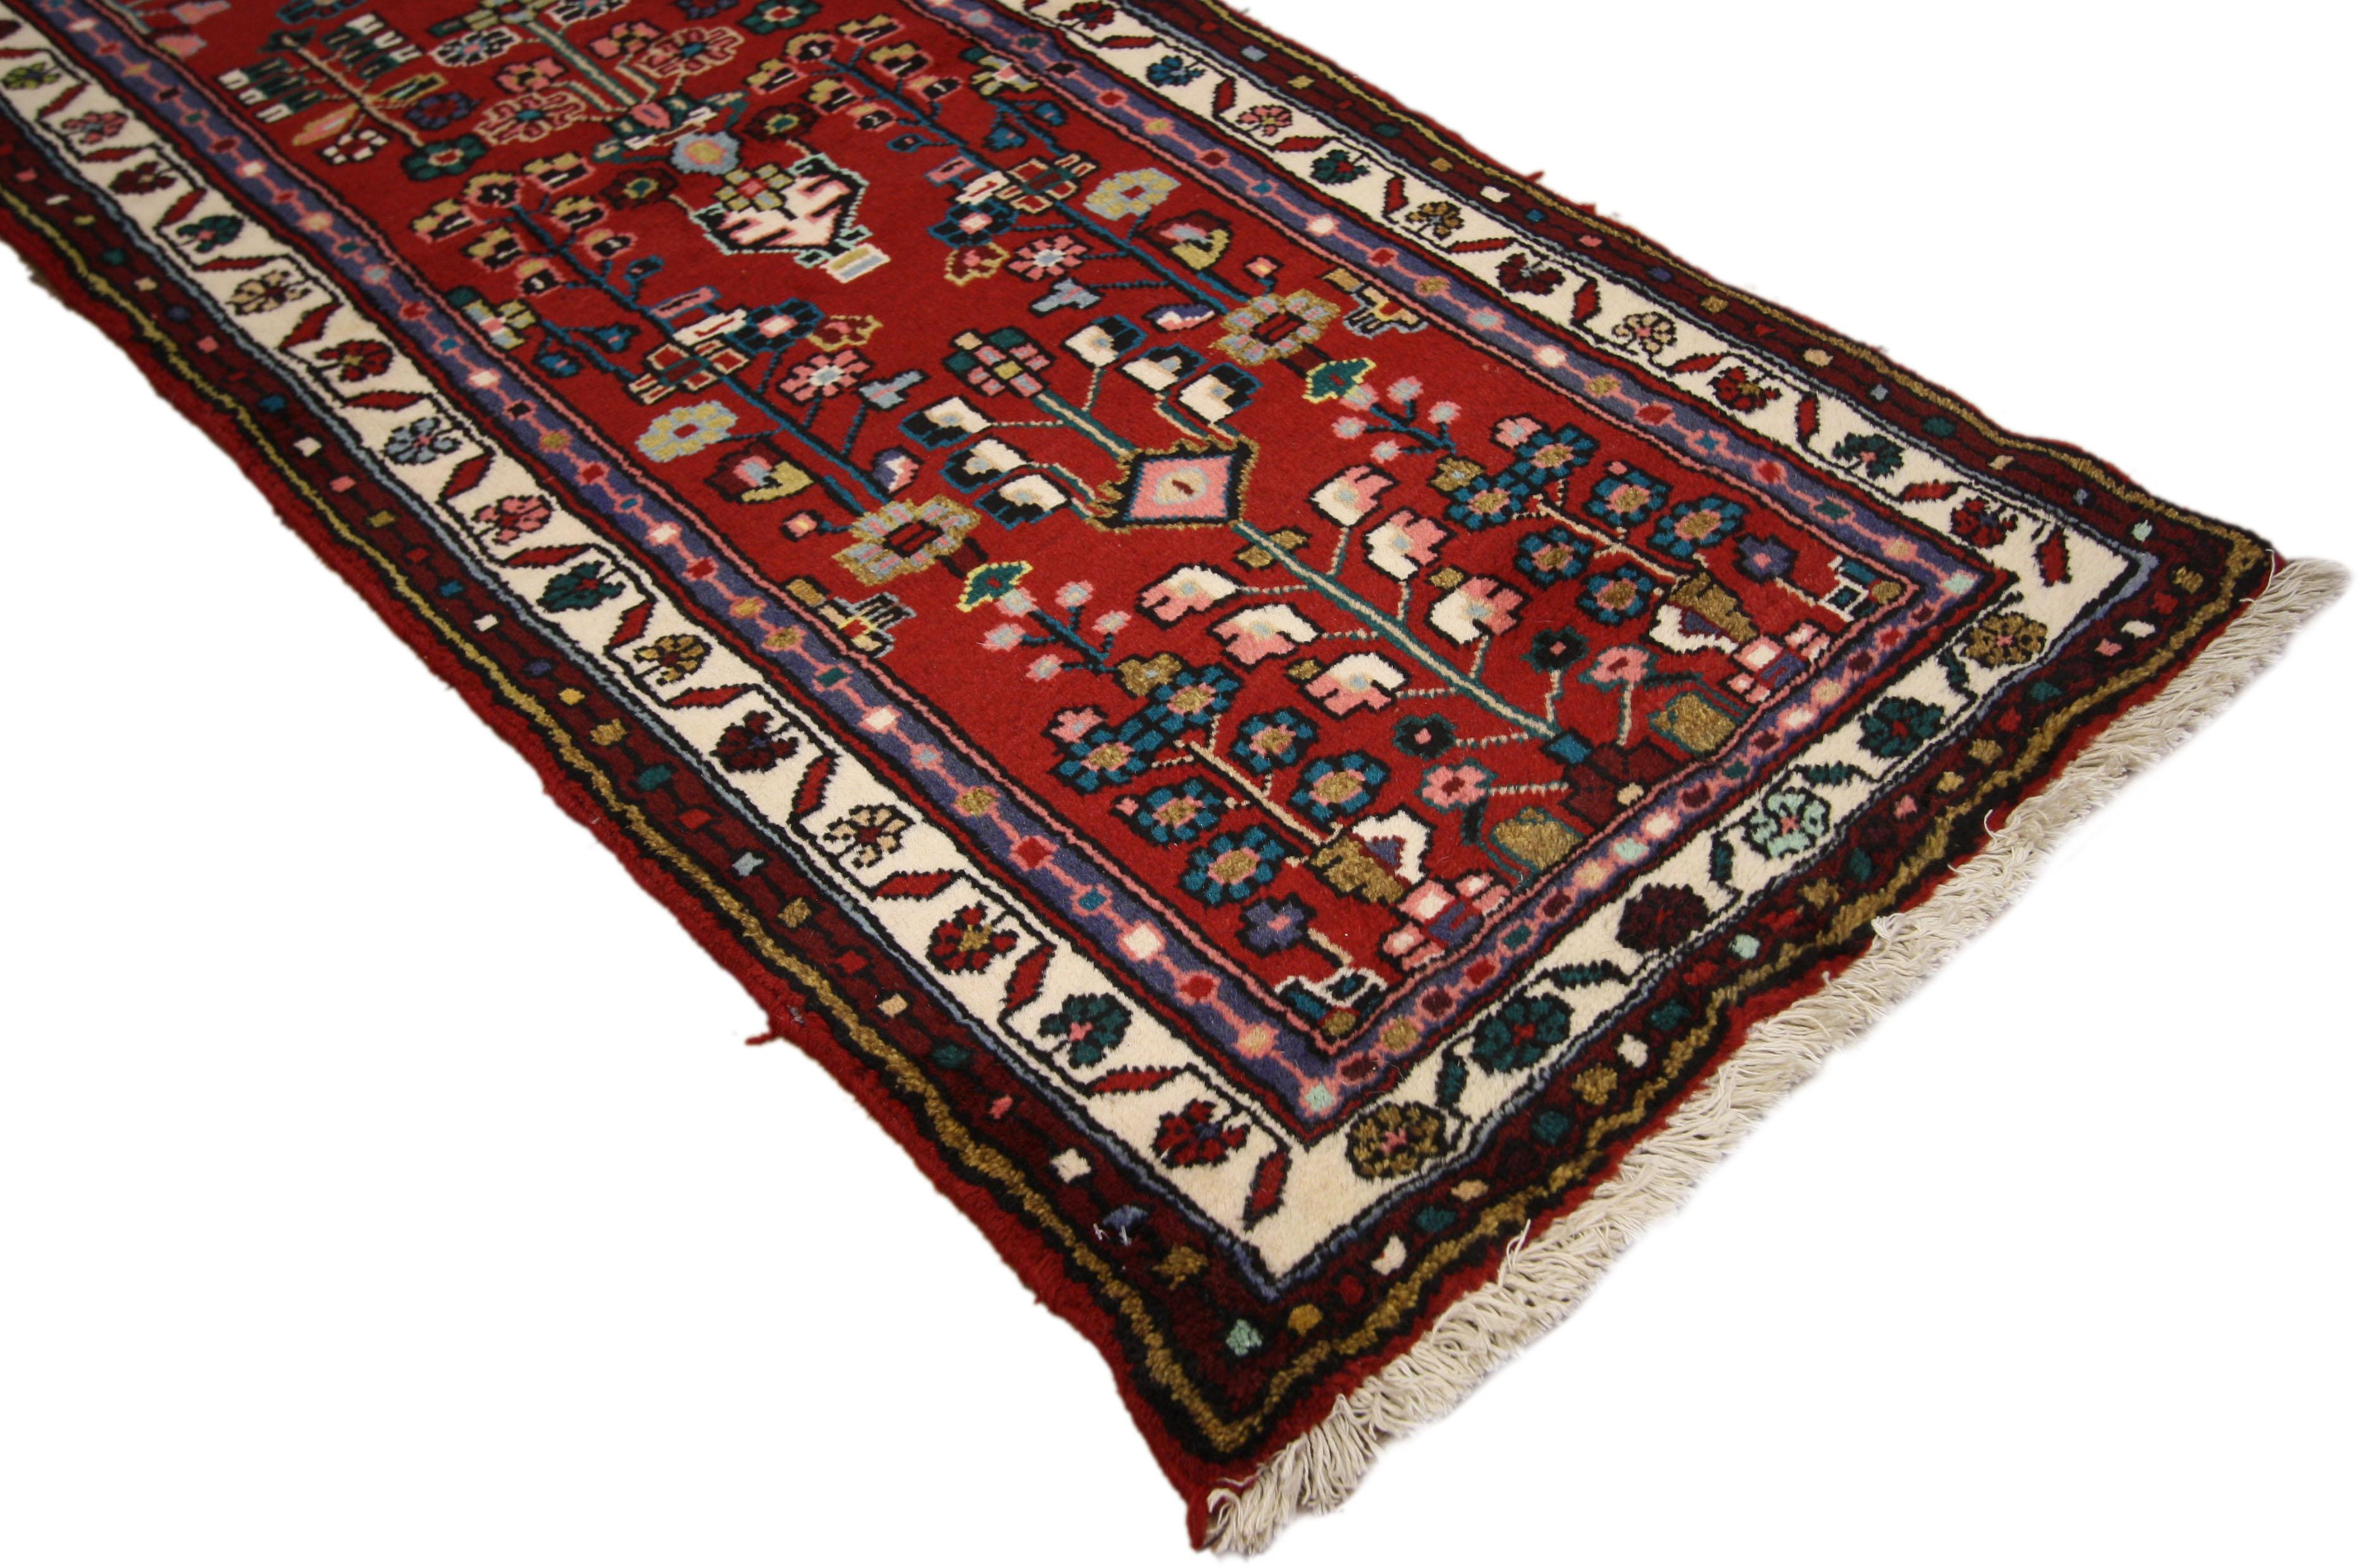 ​60182 Vintage Persian Hamadan Runner, Narrow Hallway Runner 02'02 x 09'08. ​​This hand-knotted wool vintage Persian Hamadan runner features an all-over botanical pattern composed of stylized florals, rosettes, hyacinth, leafy tendrils, and